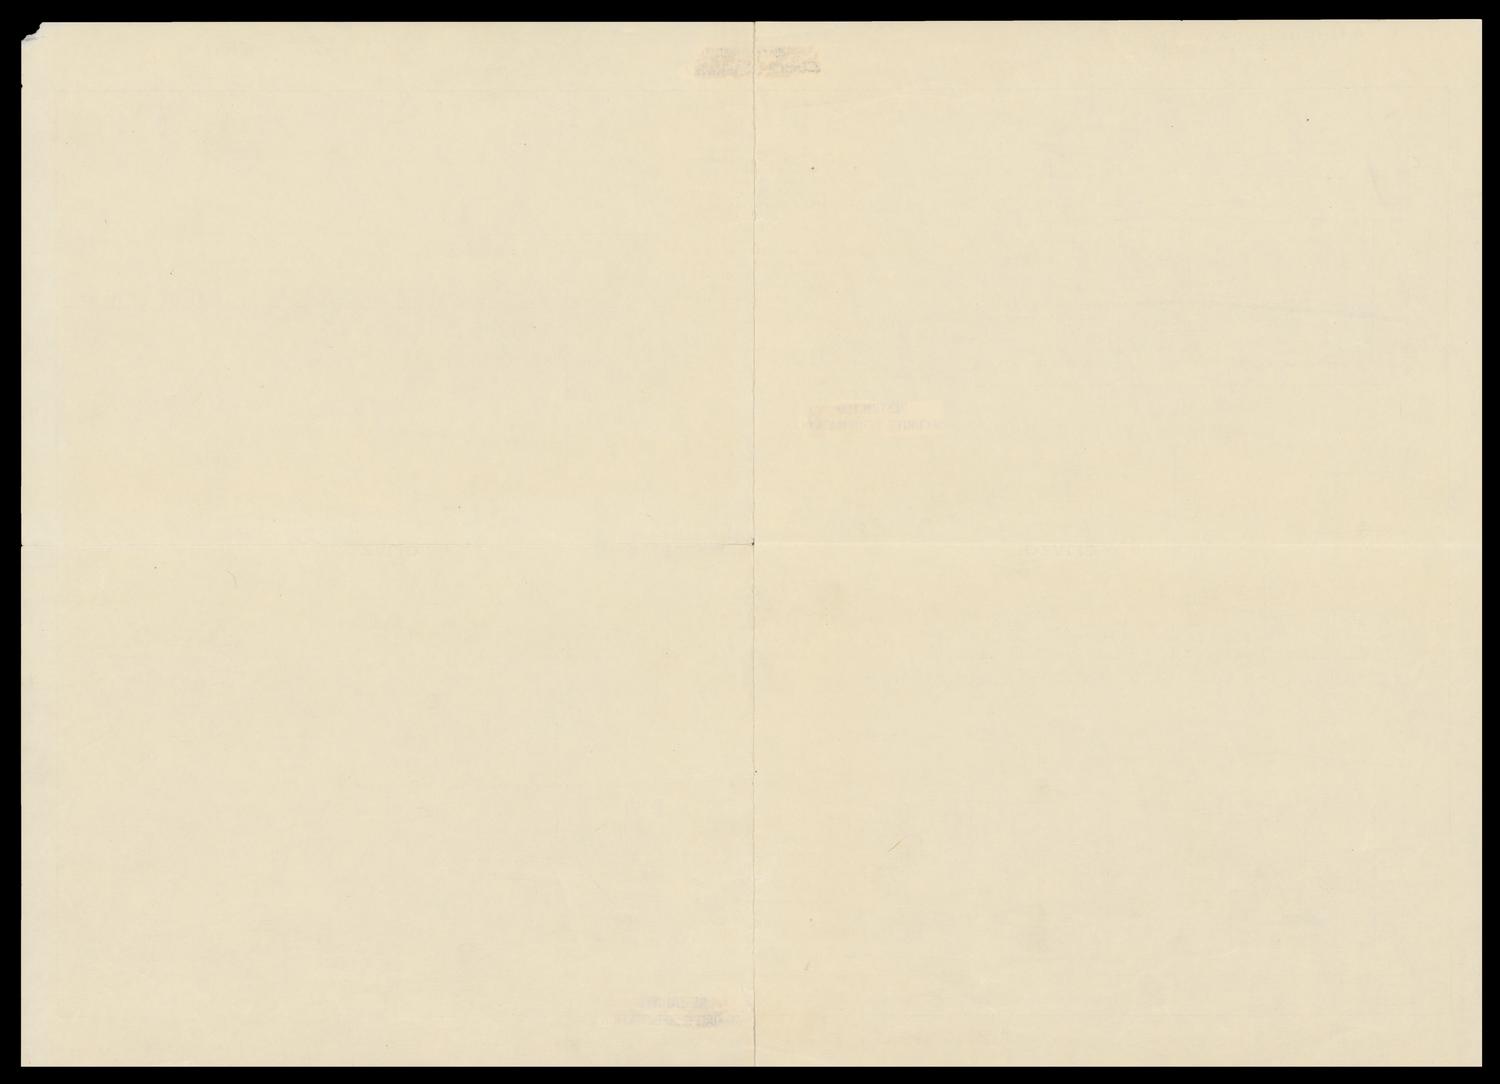 Map and Geologic Sections of Reserve Block A, Sections 13 and 24, T. 48 N., R. 18 W., Atkinson Mesa, Montrose County, Colorado
                                                
                                                    [Sequence #]: 2 of 2
                                                